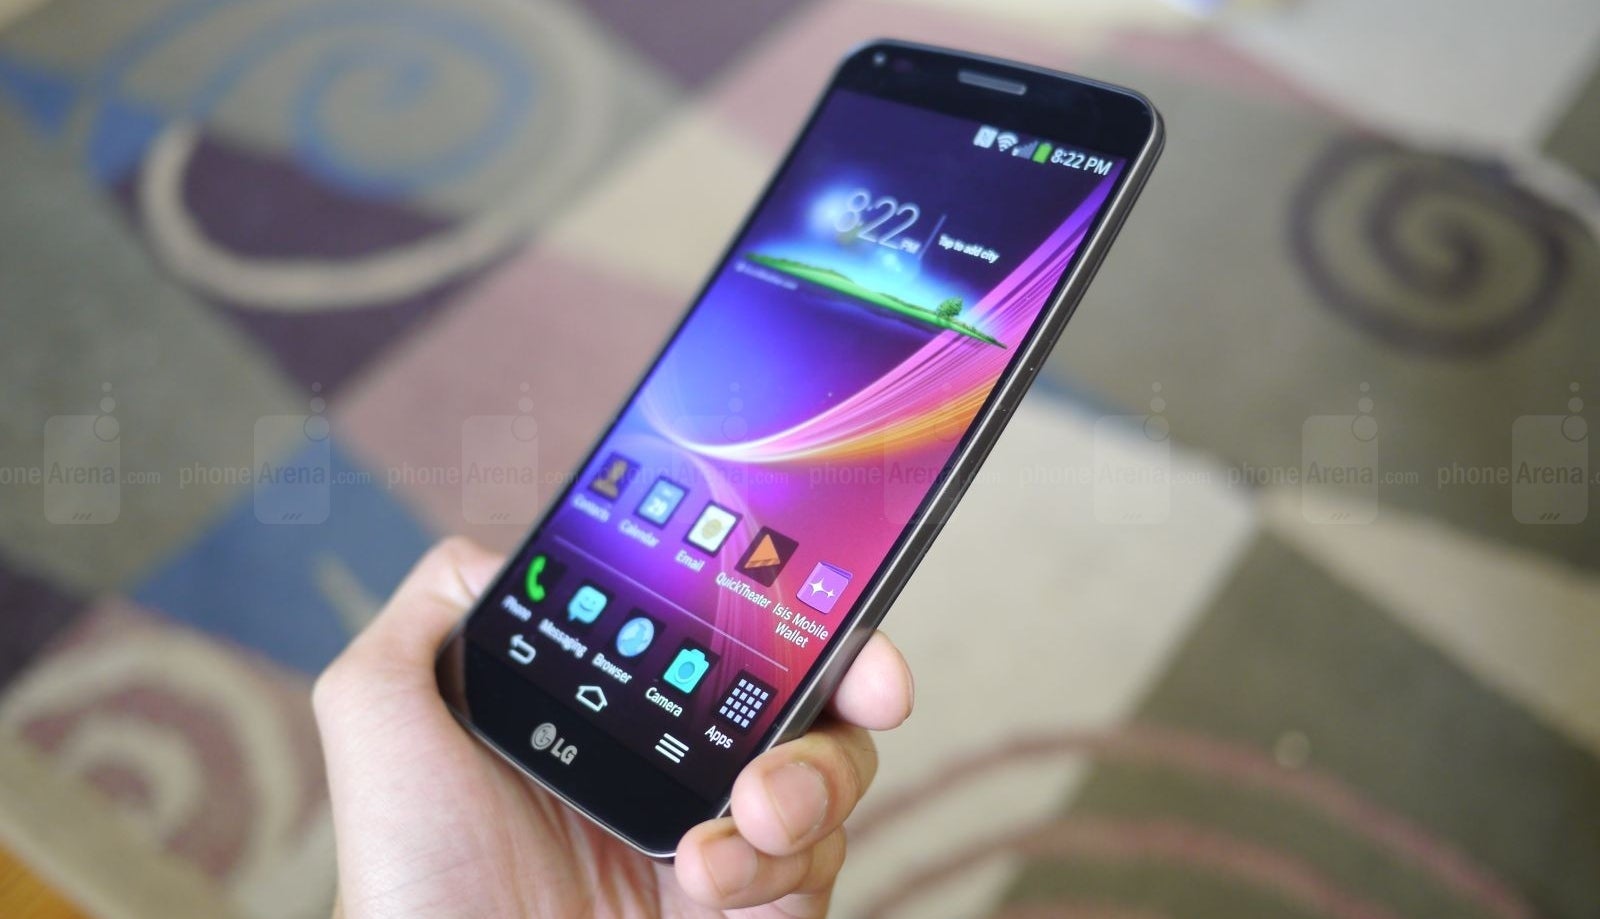 Curved LG G Flex 2 with Snapdragon 810 processor to be announced at CES 2015